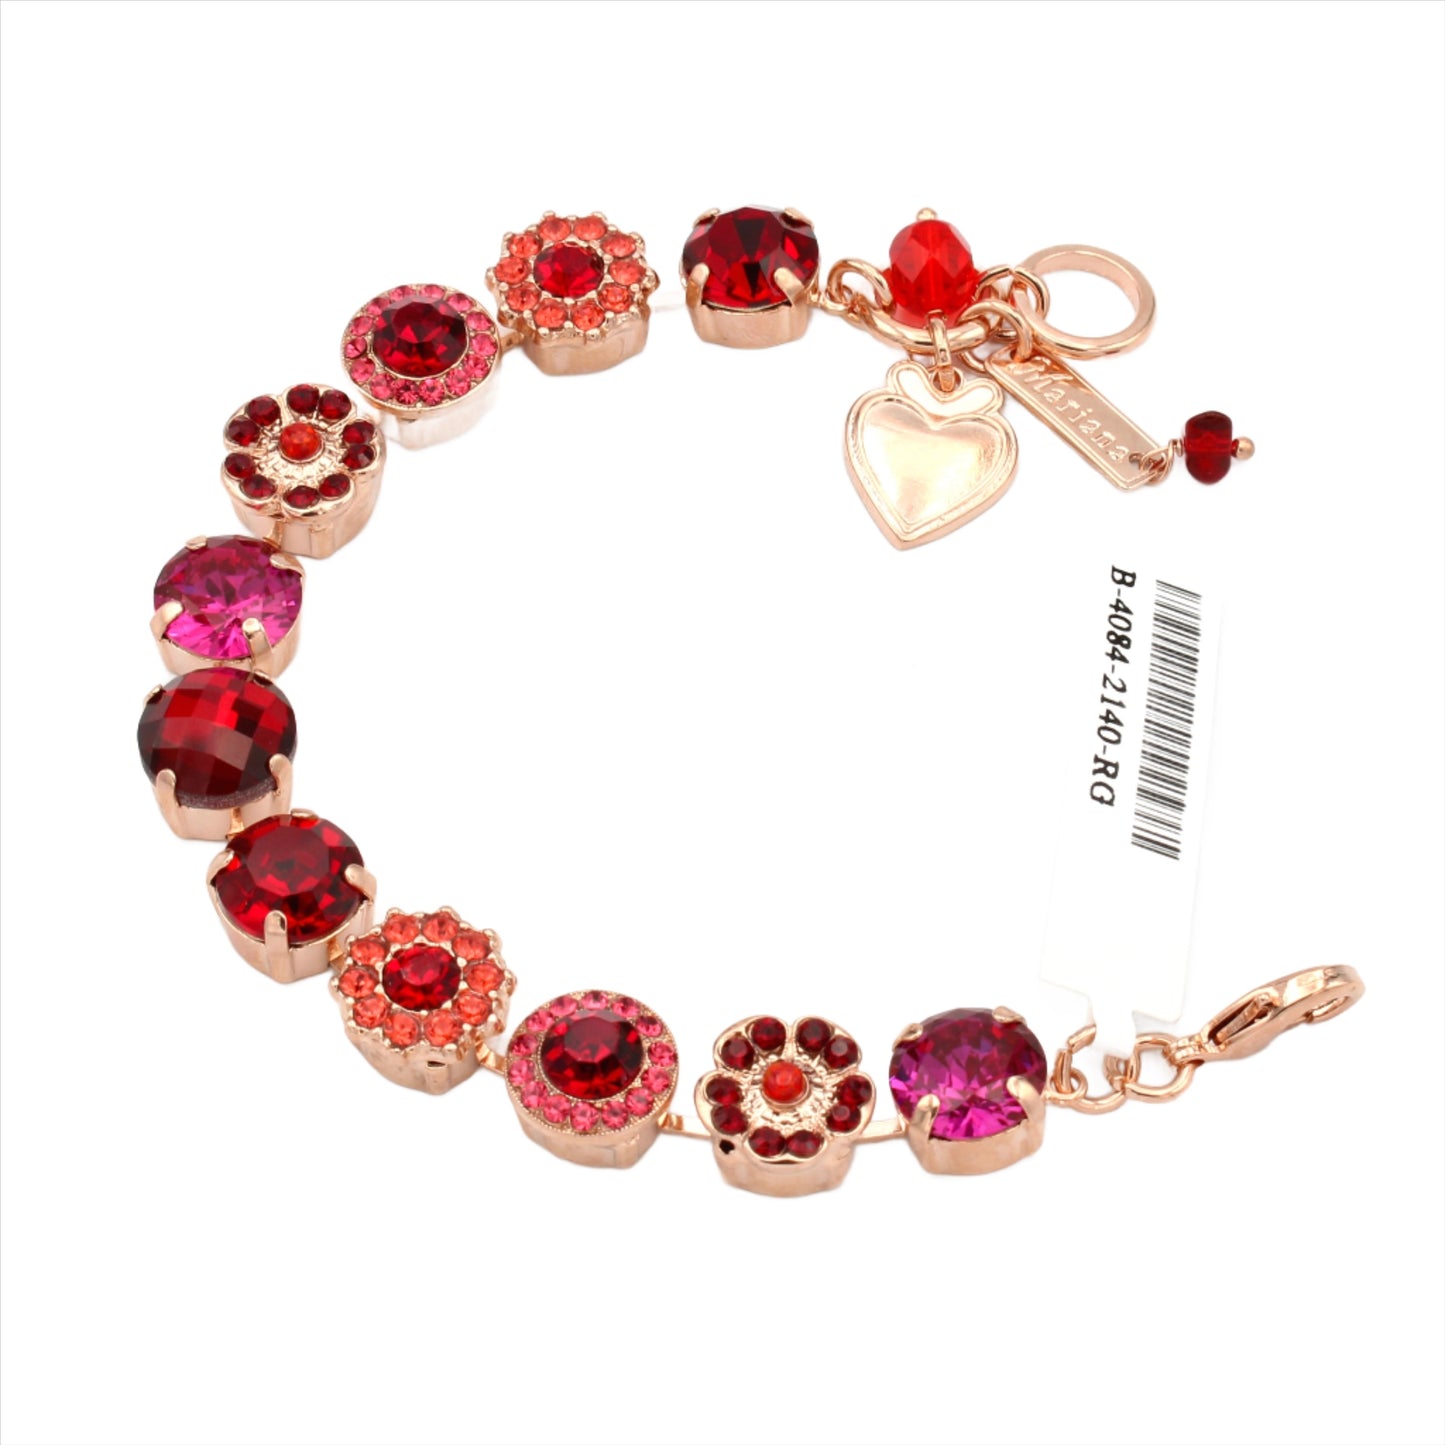 Firefly Collection Large Rosette Bracelet in Rose Gold